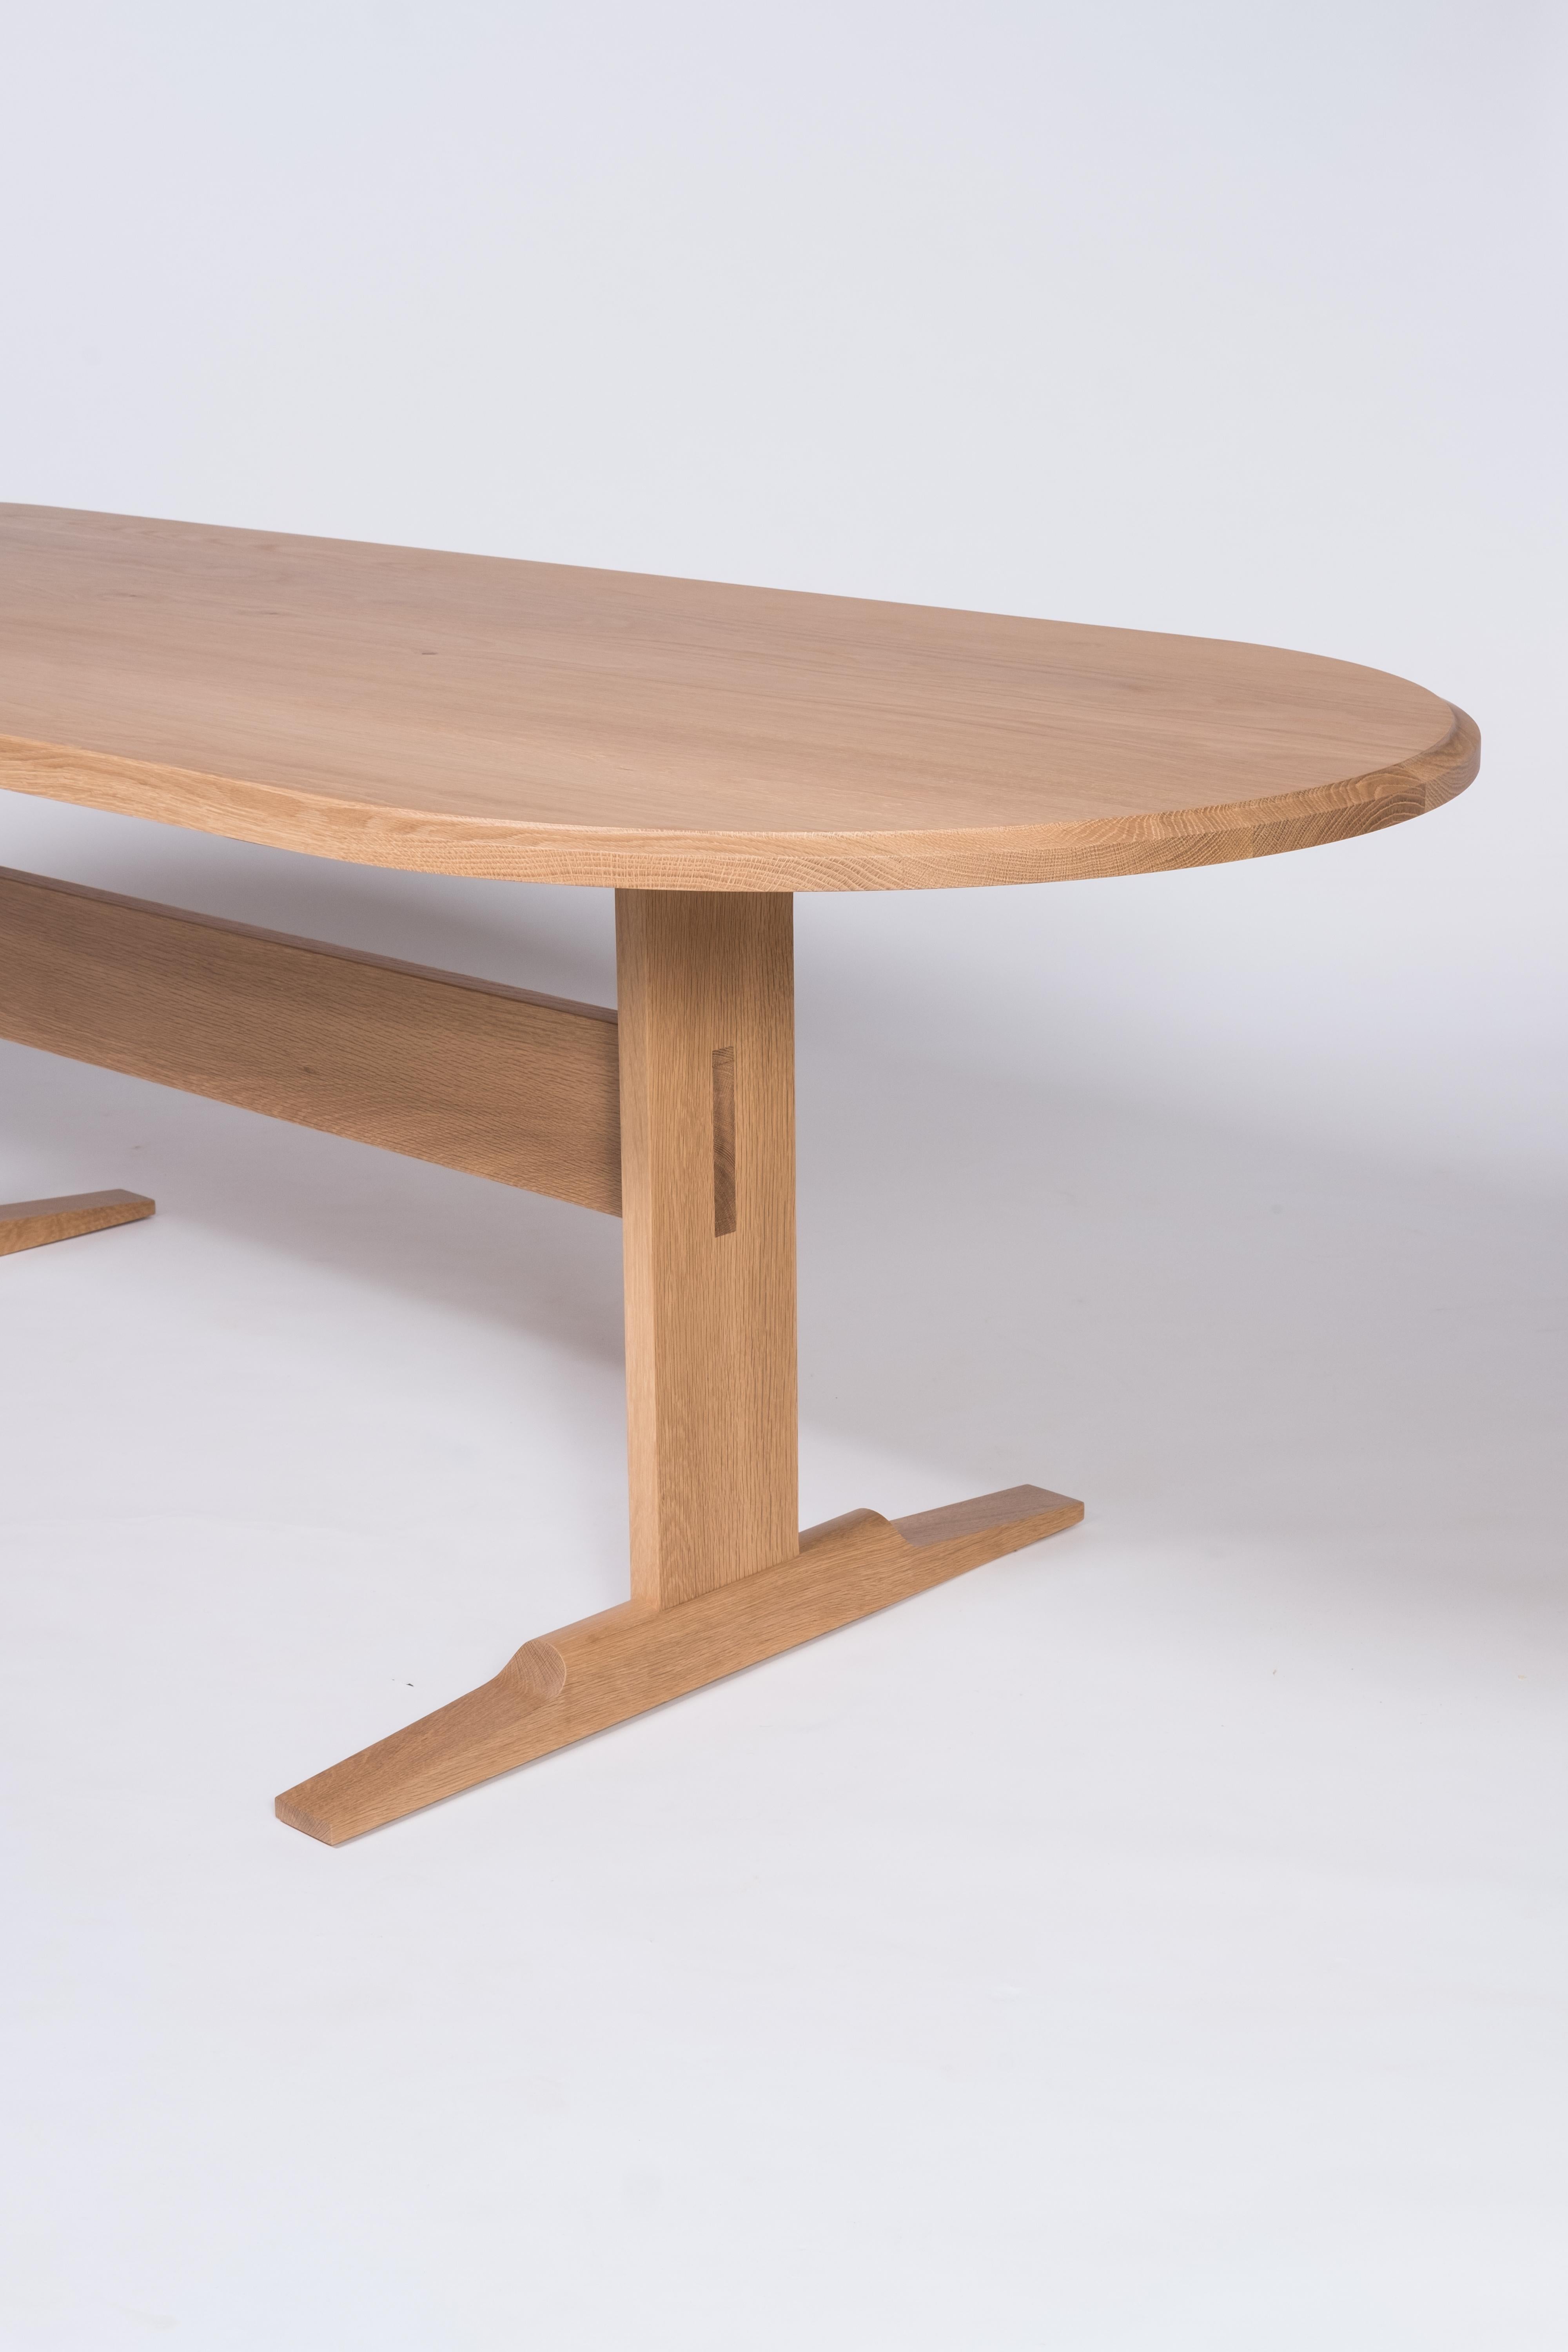 Spade Dining Table by Tretiak Works, Modern Contemporary White Oak Trestle In New Condition For Sale In Portland, OR